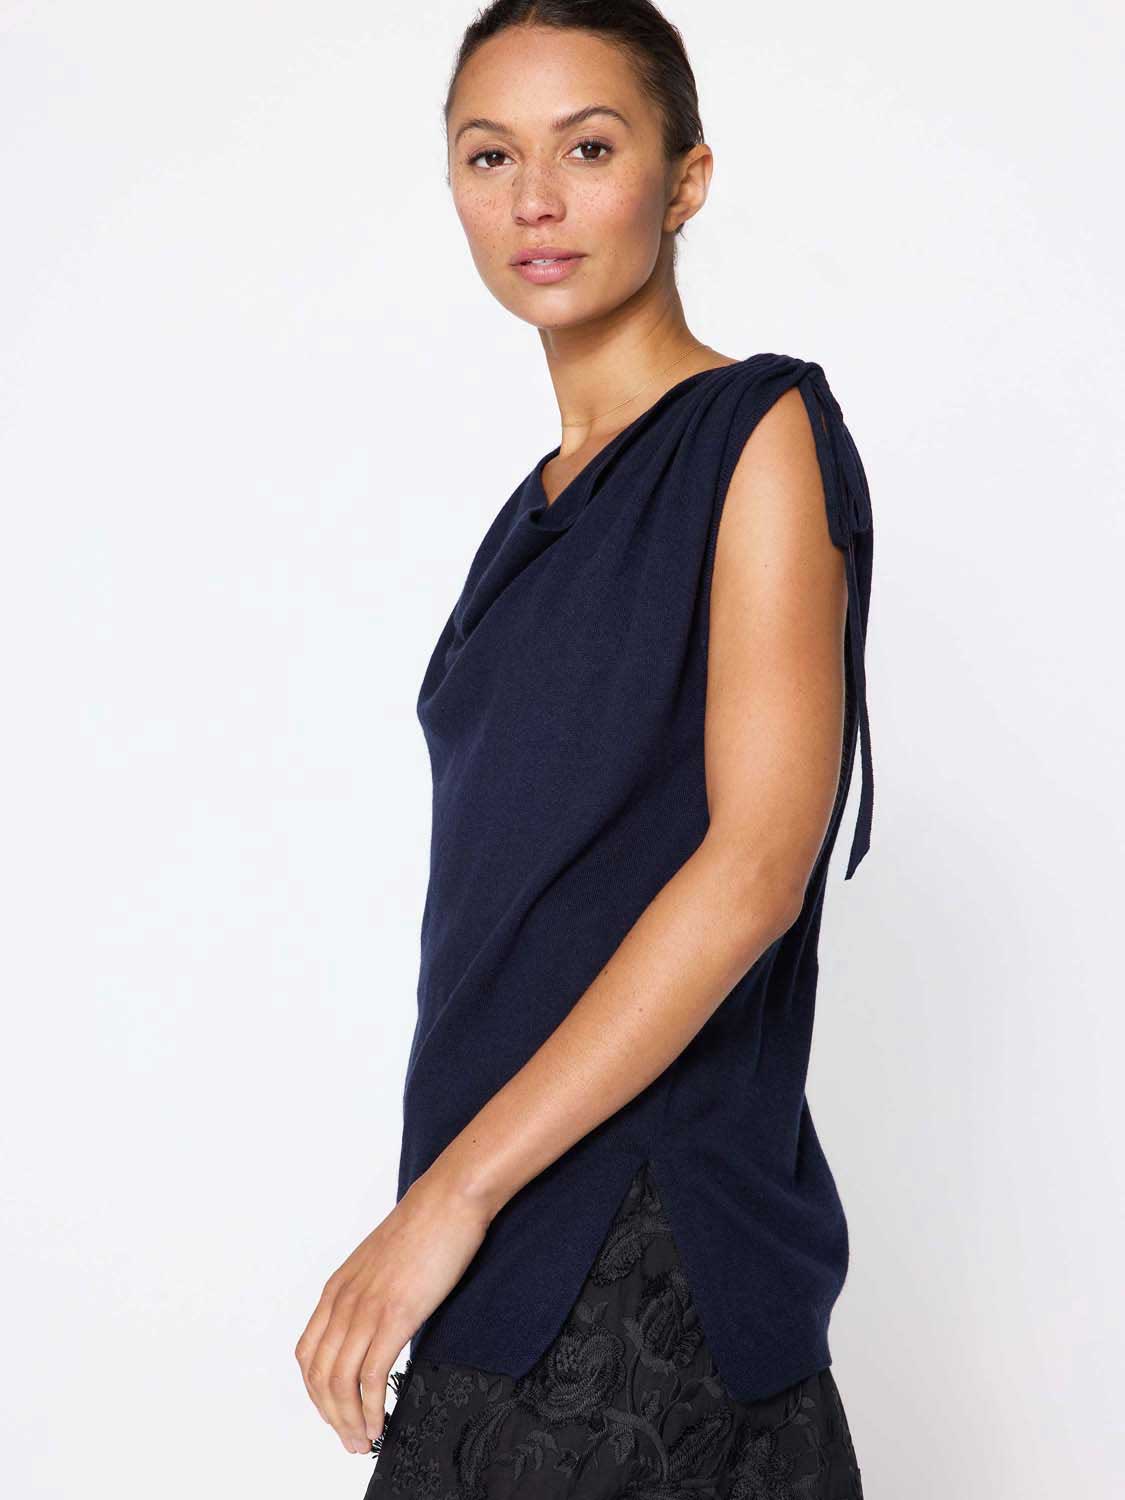 Vos sleeveless navy top side view 2